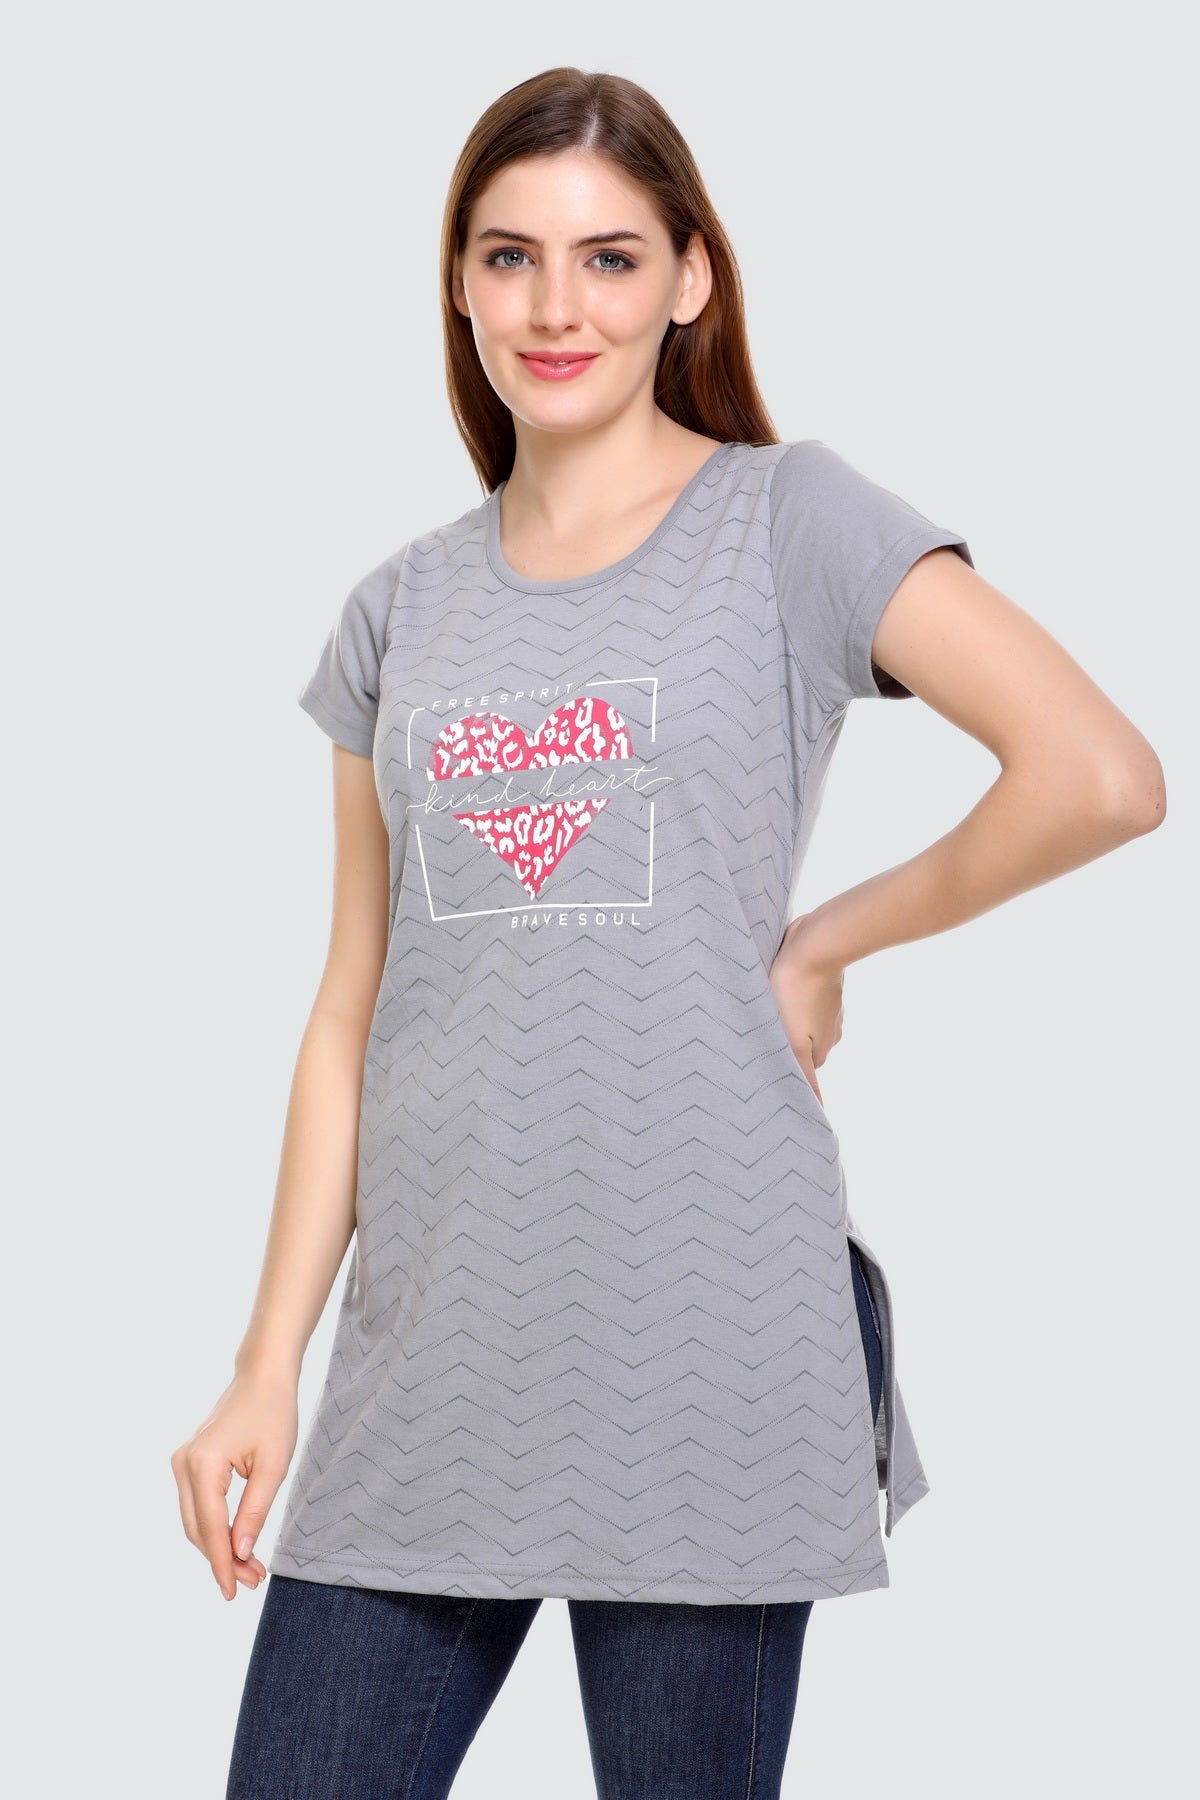 White Moon Cotton Casual Women Long T Shirts (Steel grey) whitemoon.in